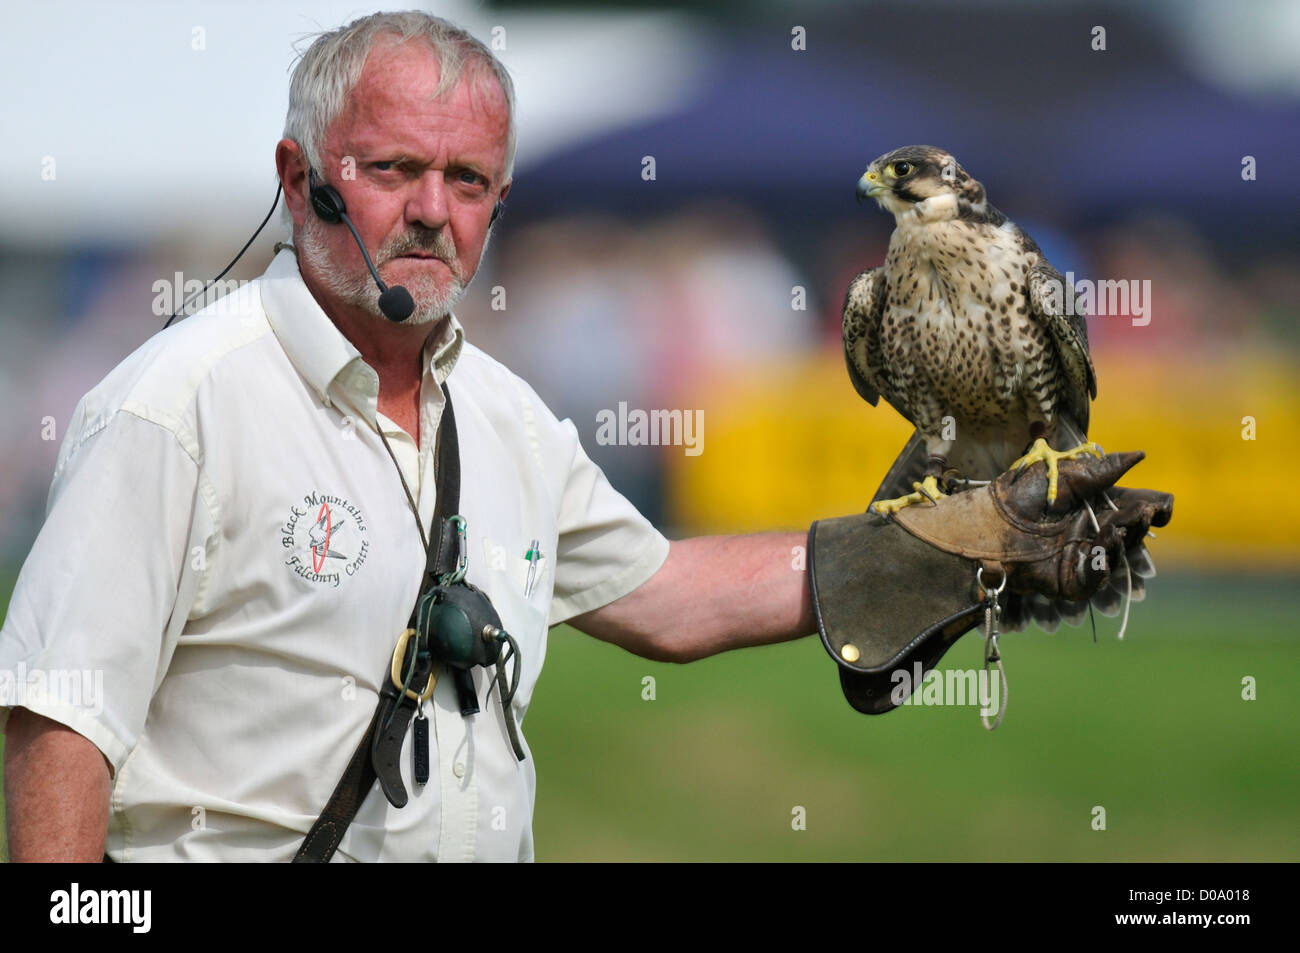 Falconer with Saker Peregrine cross Falcon at Usk Show, Monmouthshire, Wales Stock Photo